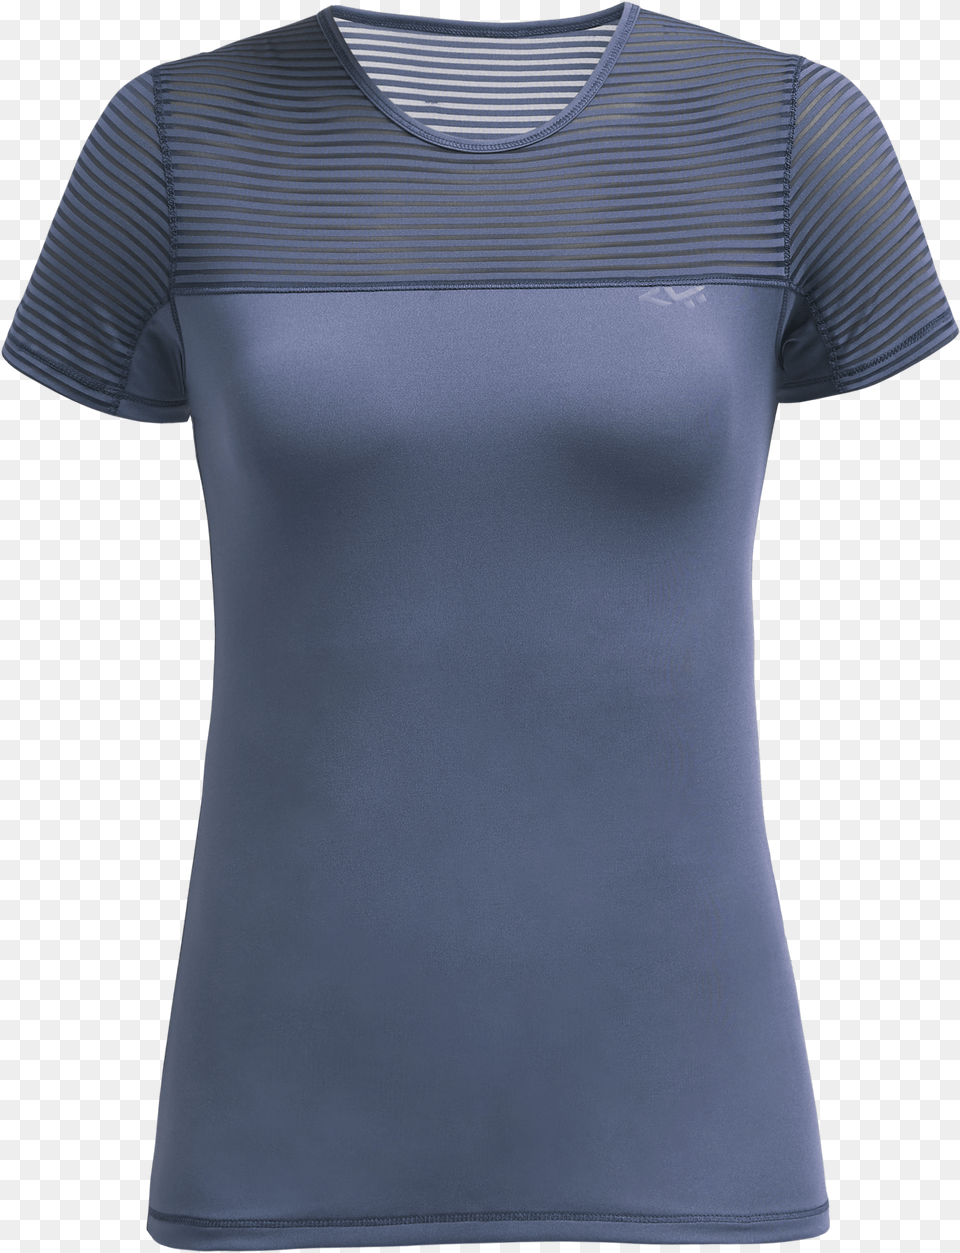 Miko Tee Dusty Blue Active Shirt Png